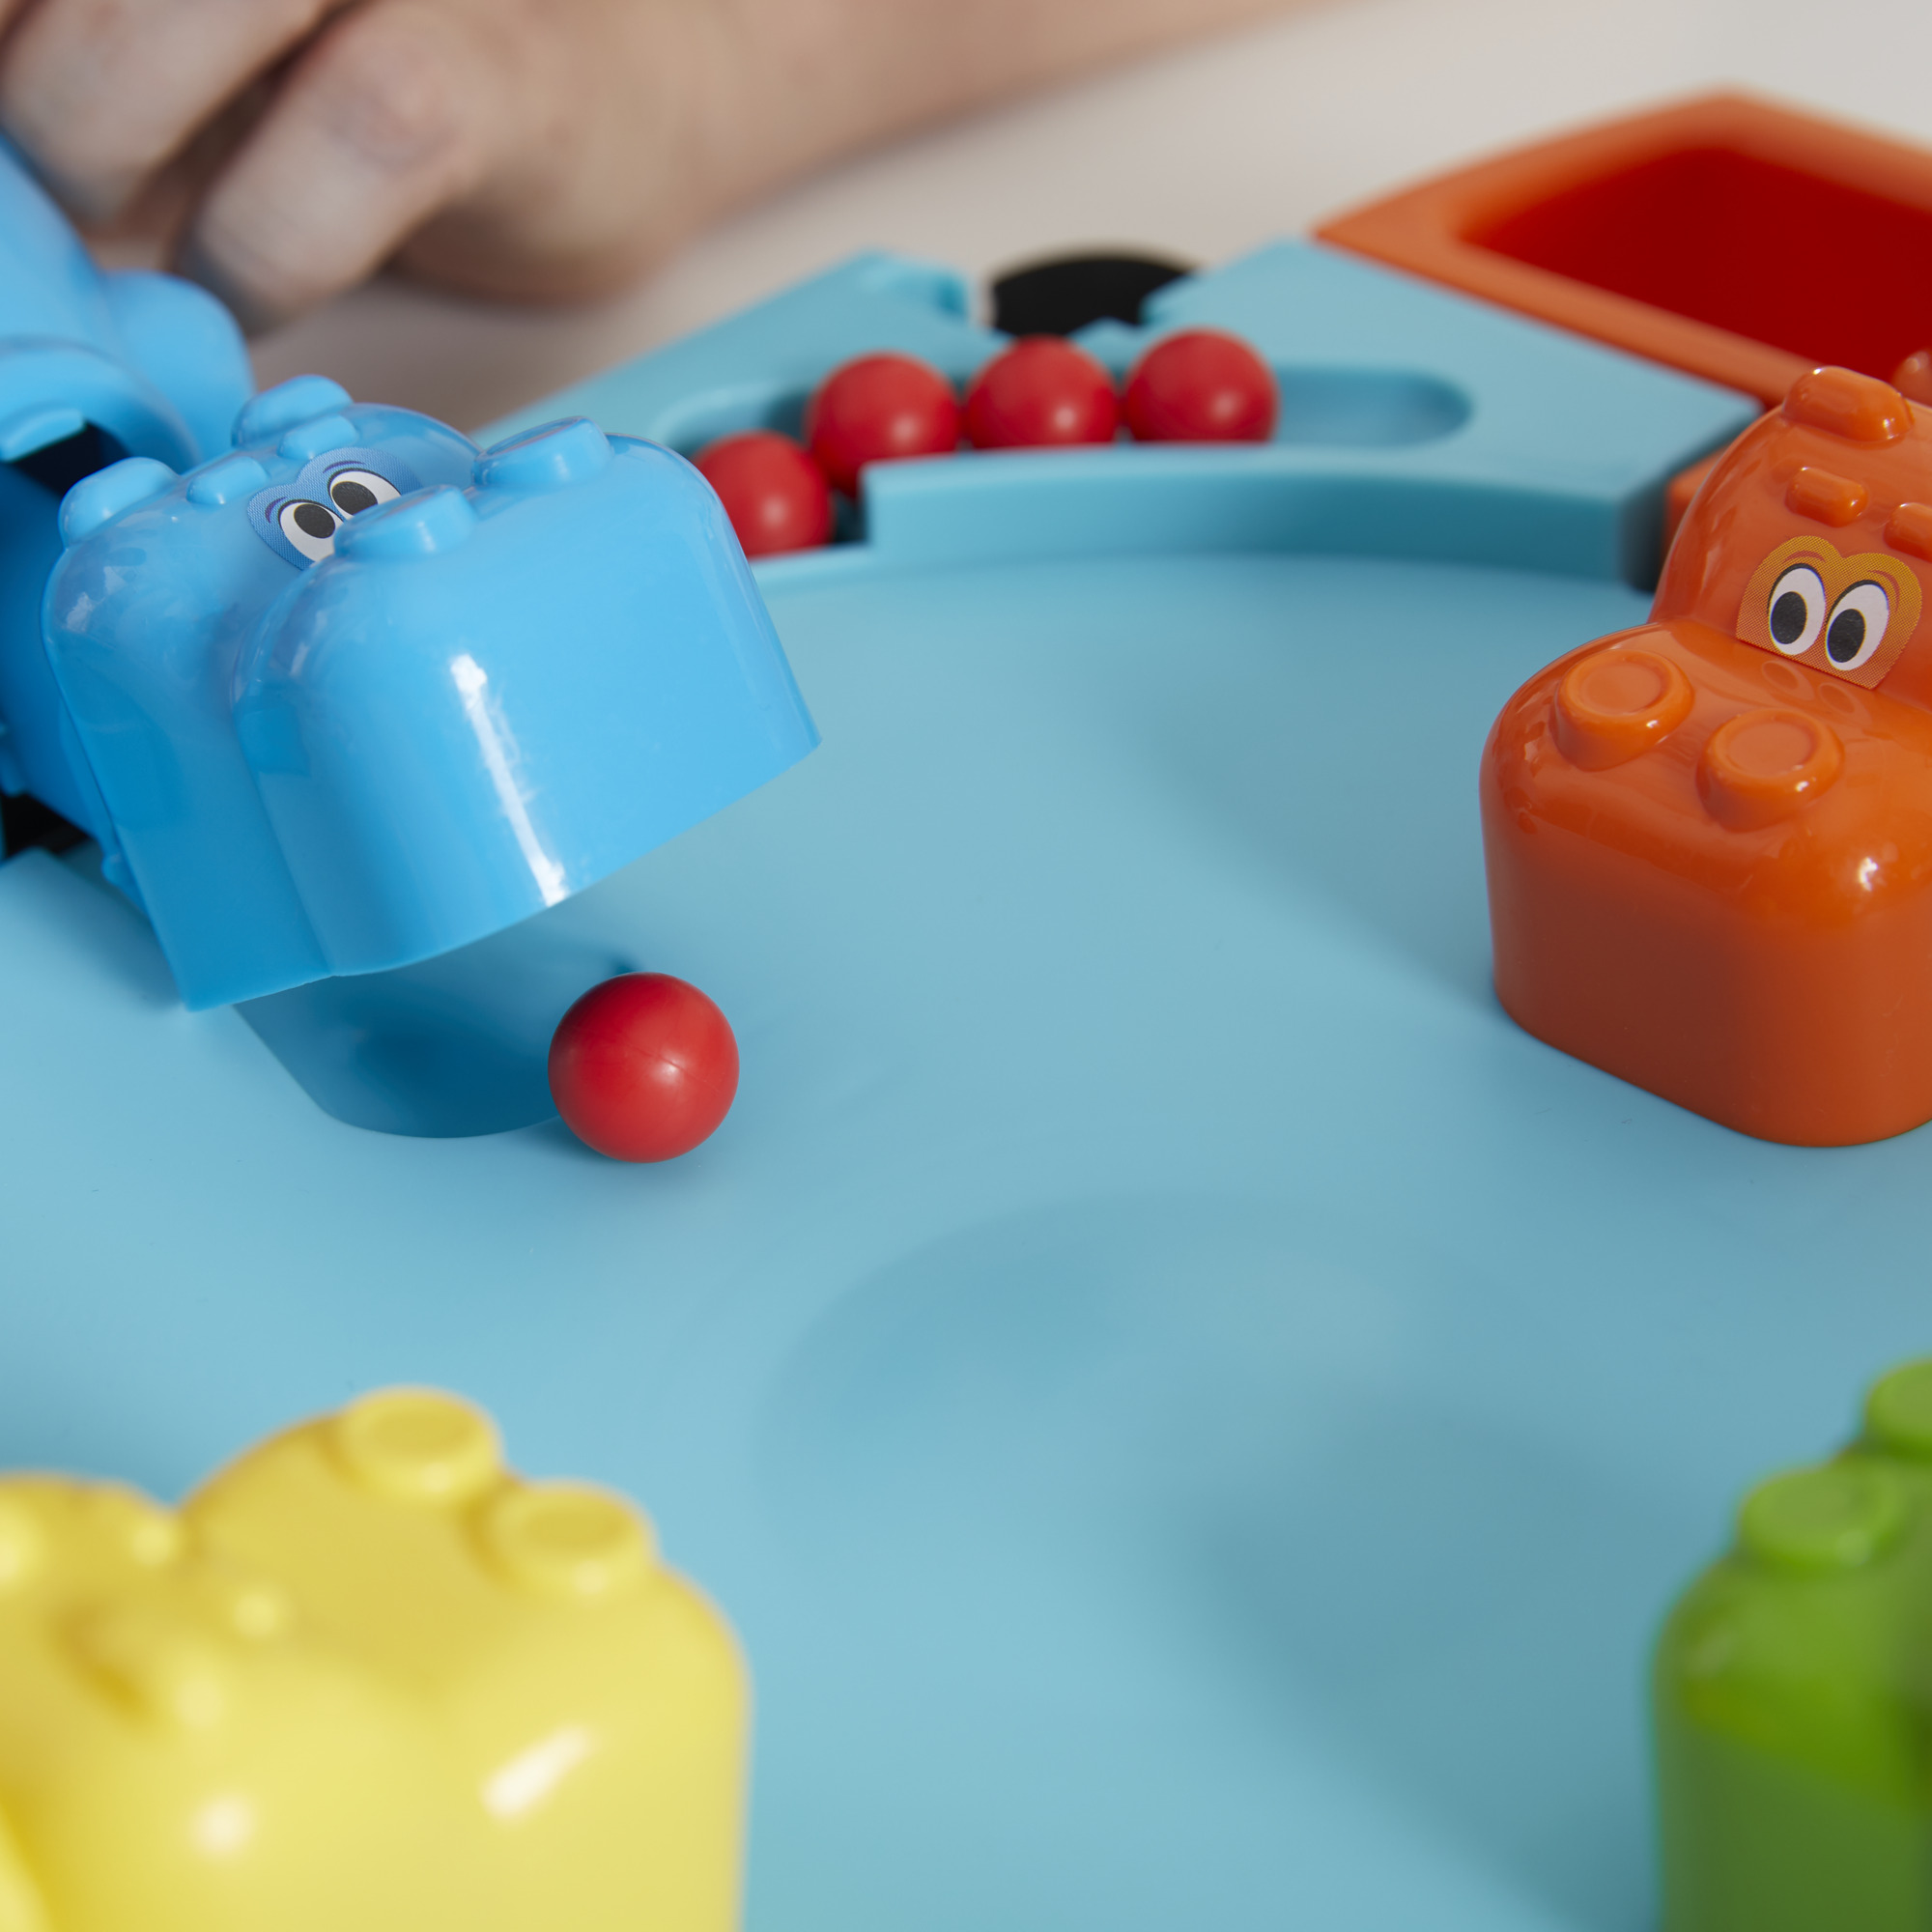 Elefun & Friends Hungry Hungry Hippos Board Game, 2-4 Players - image 4 of 11